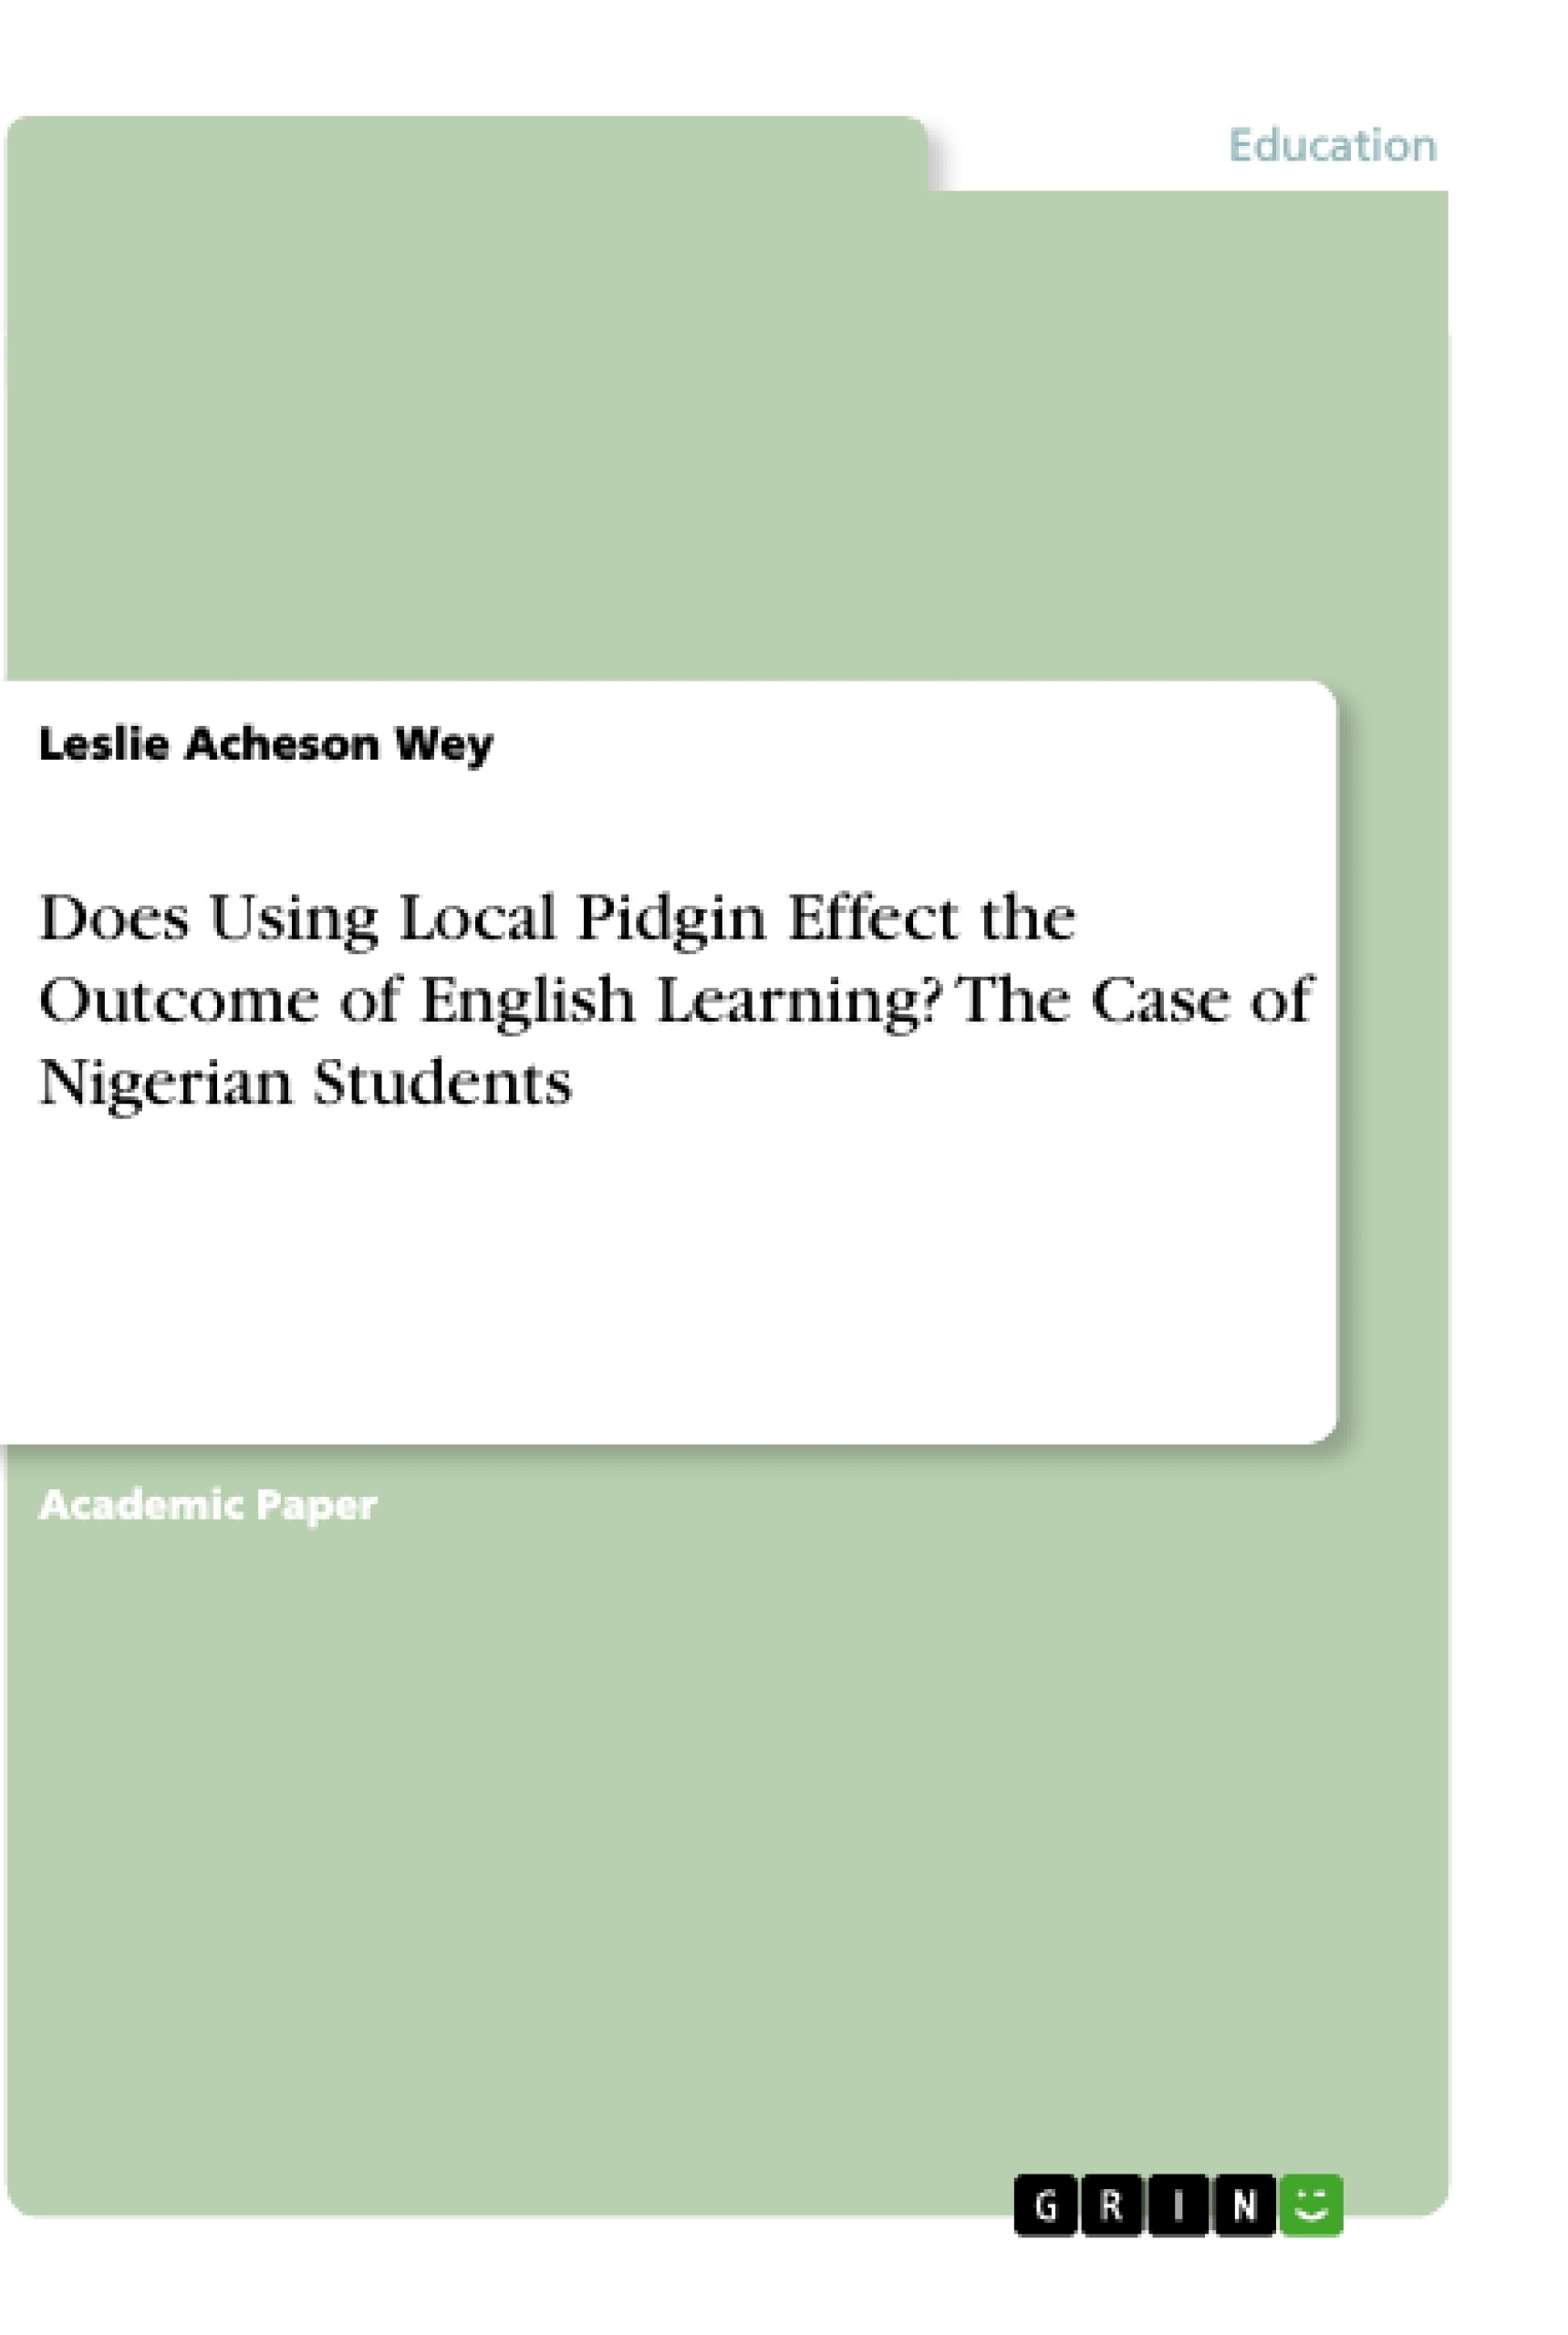 Title: Does Using Local Pidgin Effect the Outcome of English Learning? The Case of Nigerian Students